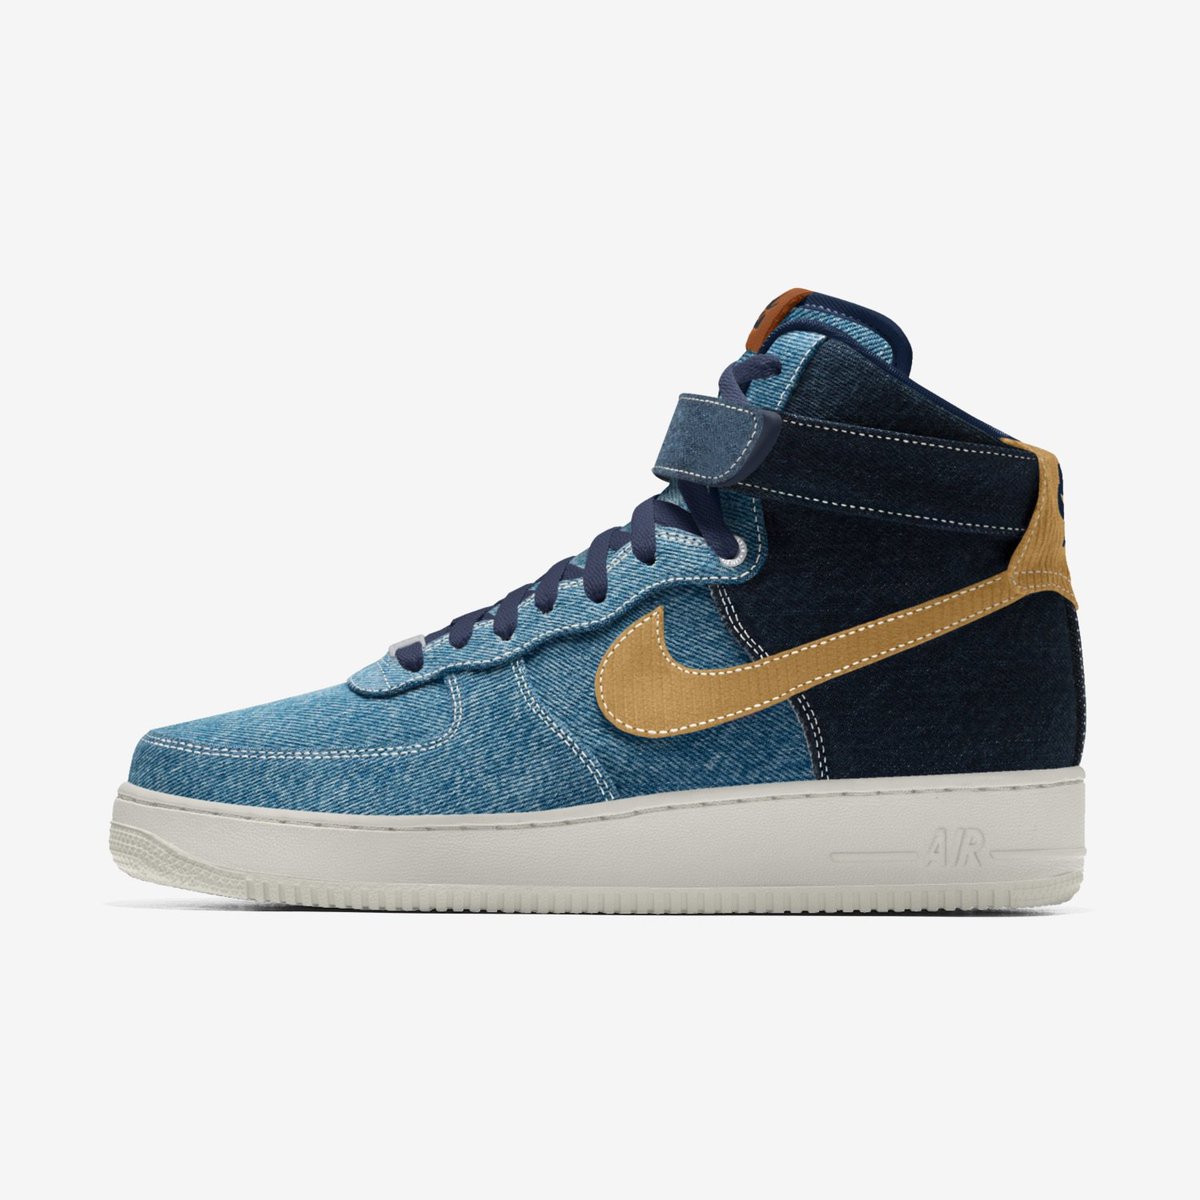 J23 iPhone App on X: Nike Air Force 1 '07 LV8 EMB All-Star 10am